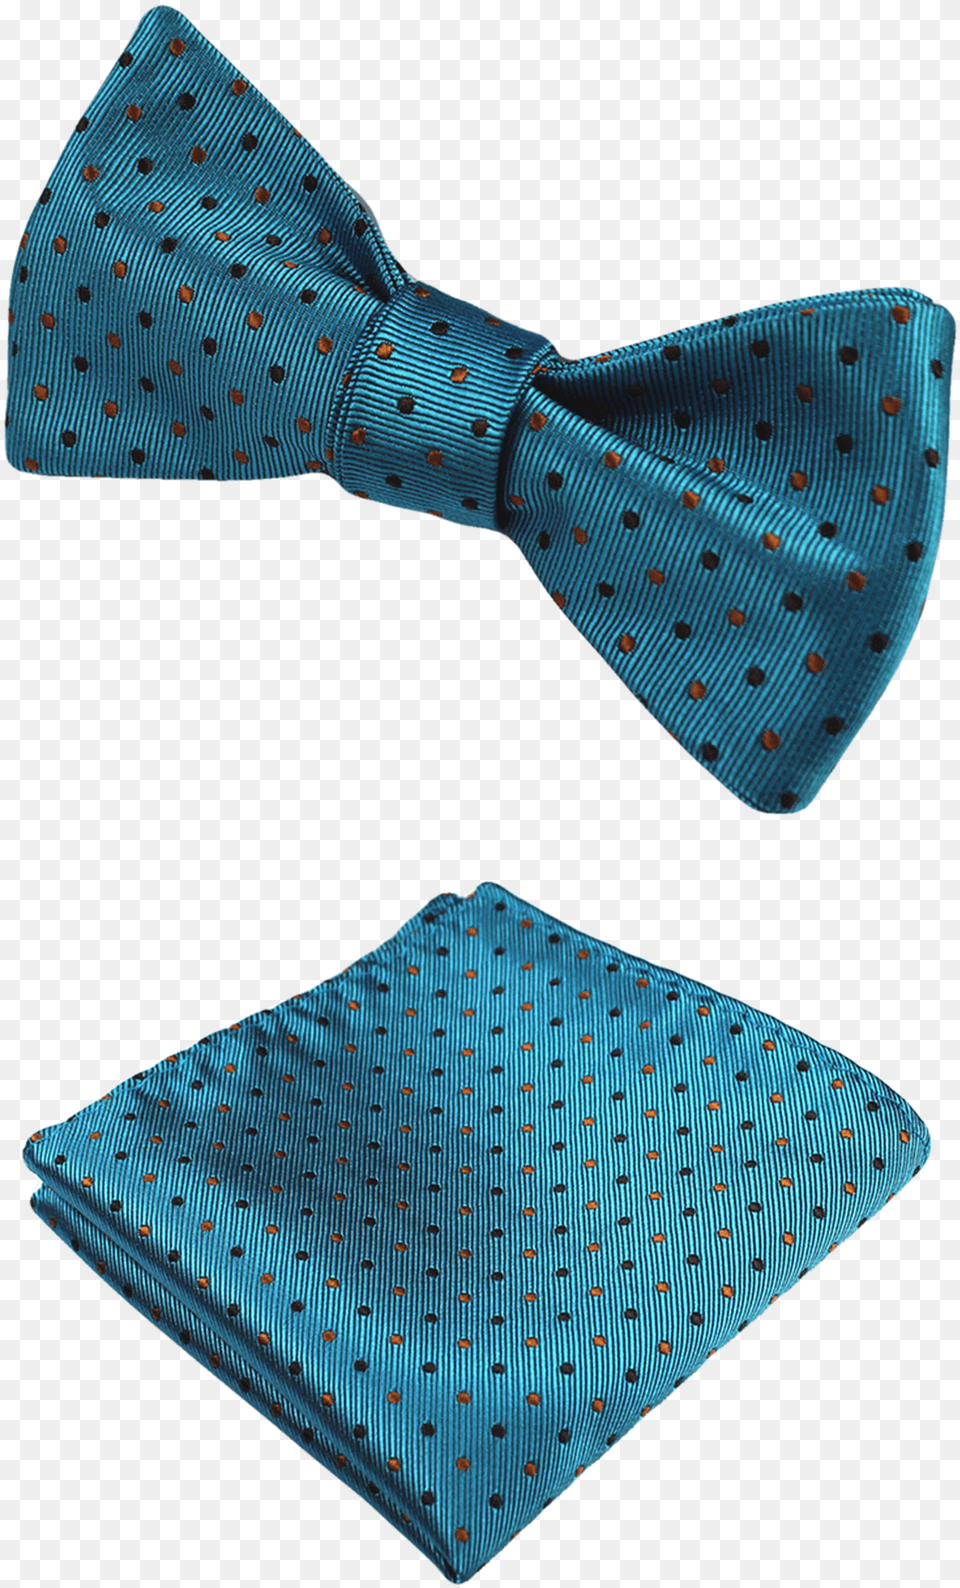 Teal Black U0026 Gold Bow Tie And Pocket Square Polka Dot, Accessories, Formal Wear, Necktie, Bow Tie Free Png